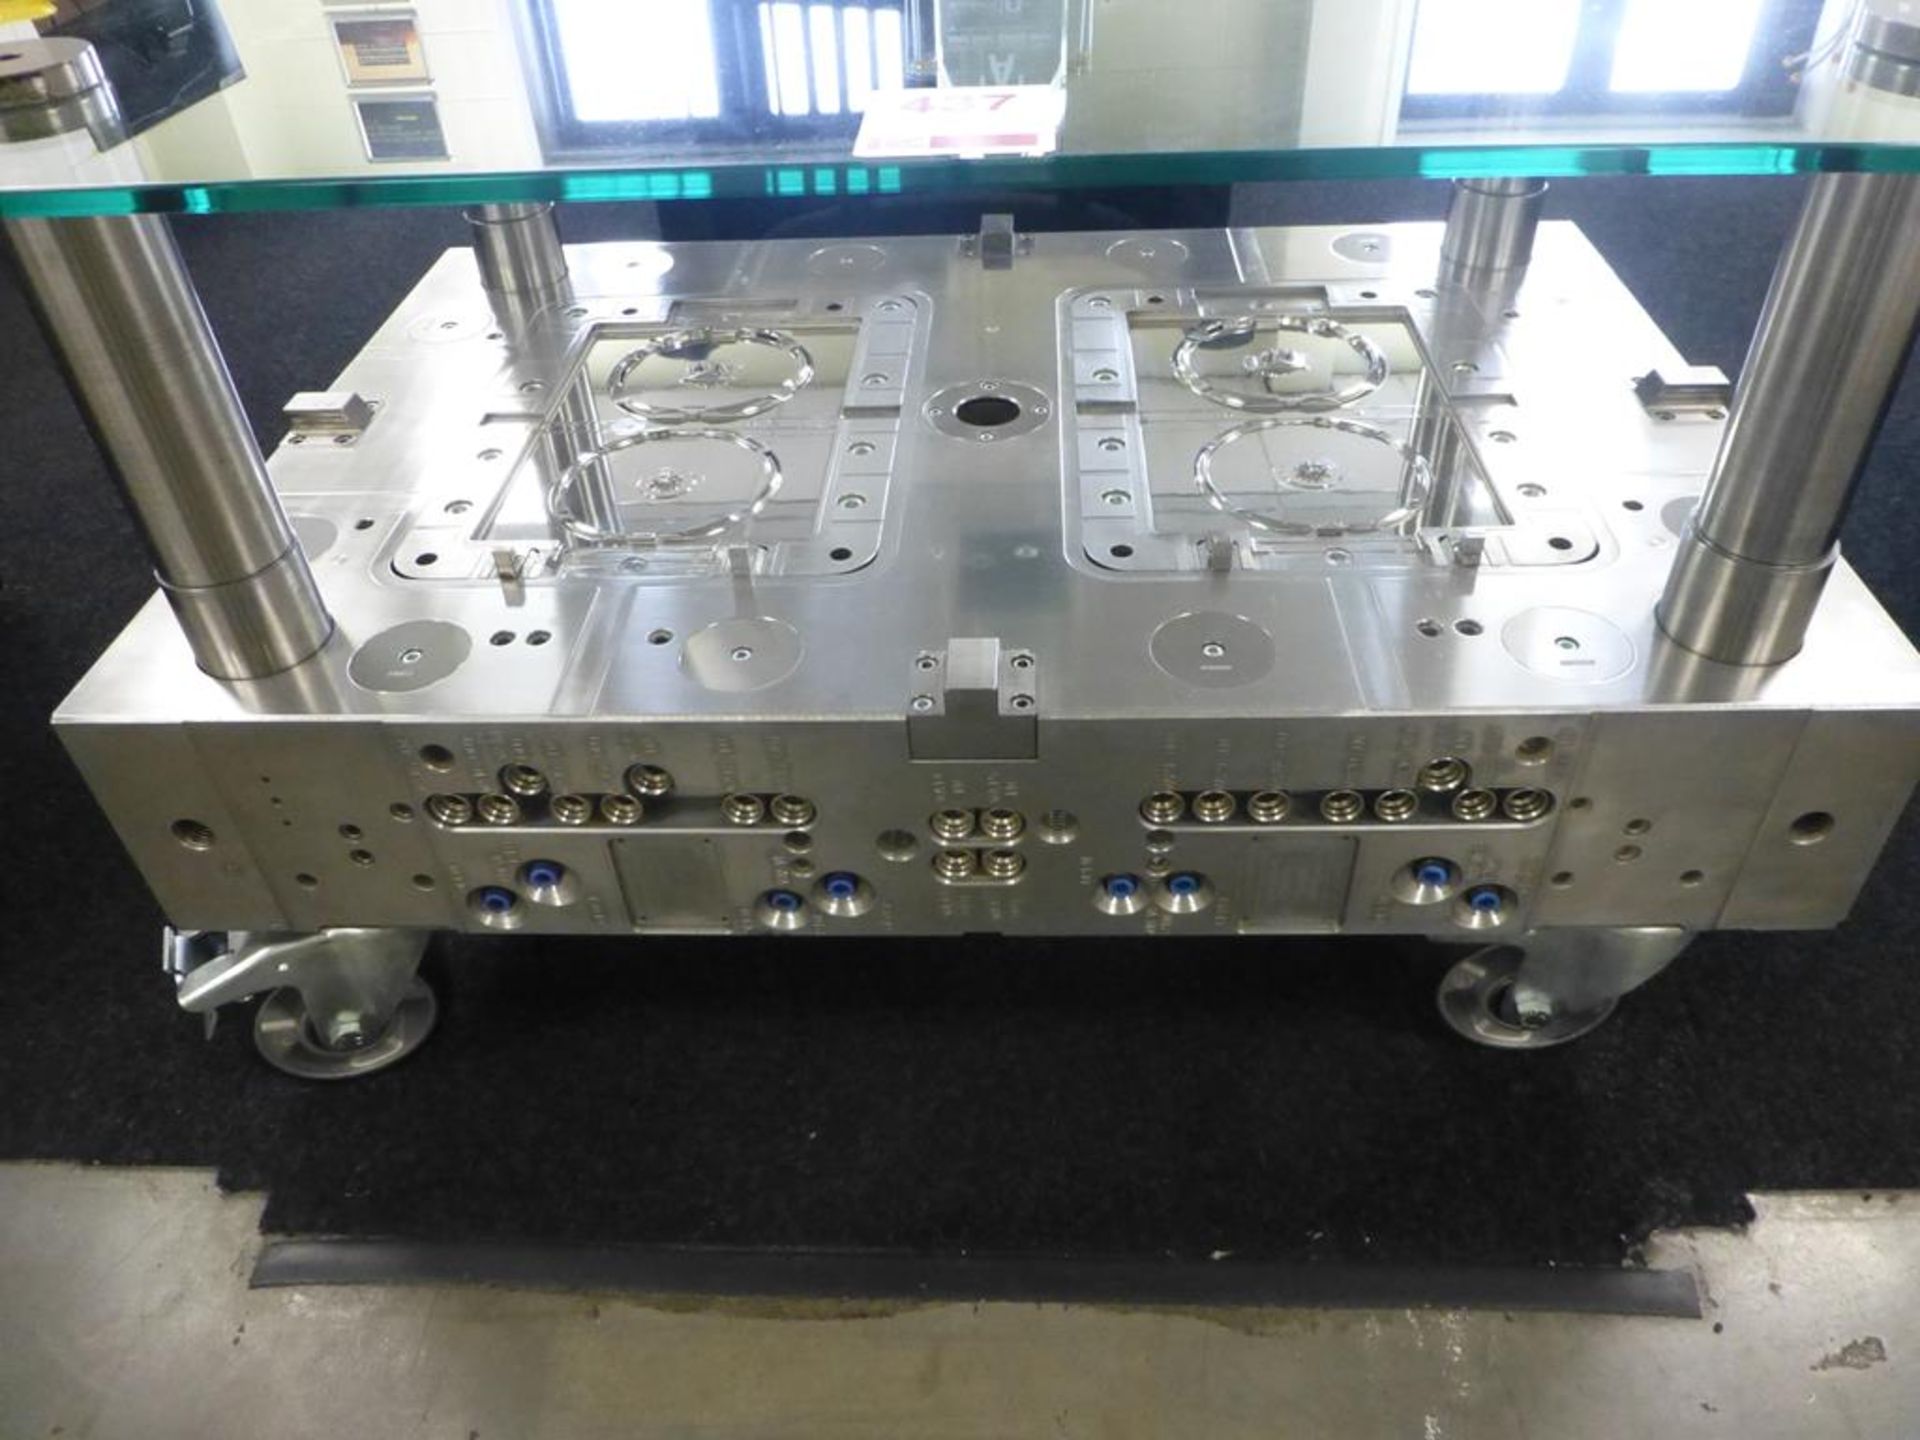 1000mm x 700mm x 575mm half mould glass top coffee table with wheels - Image 4 of 5